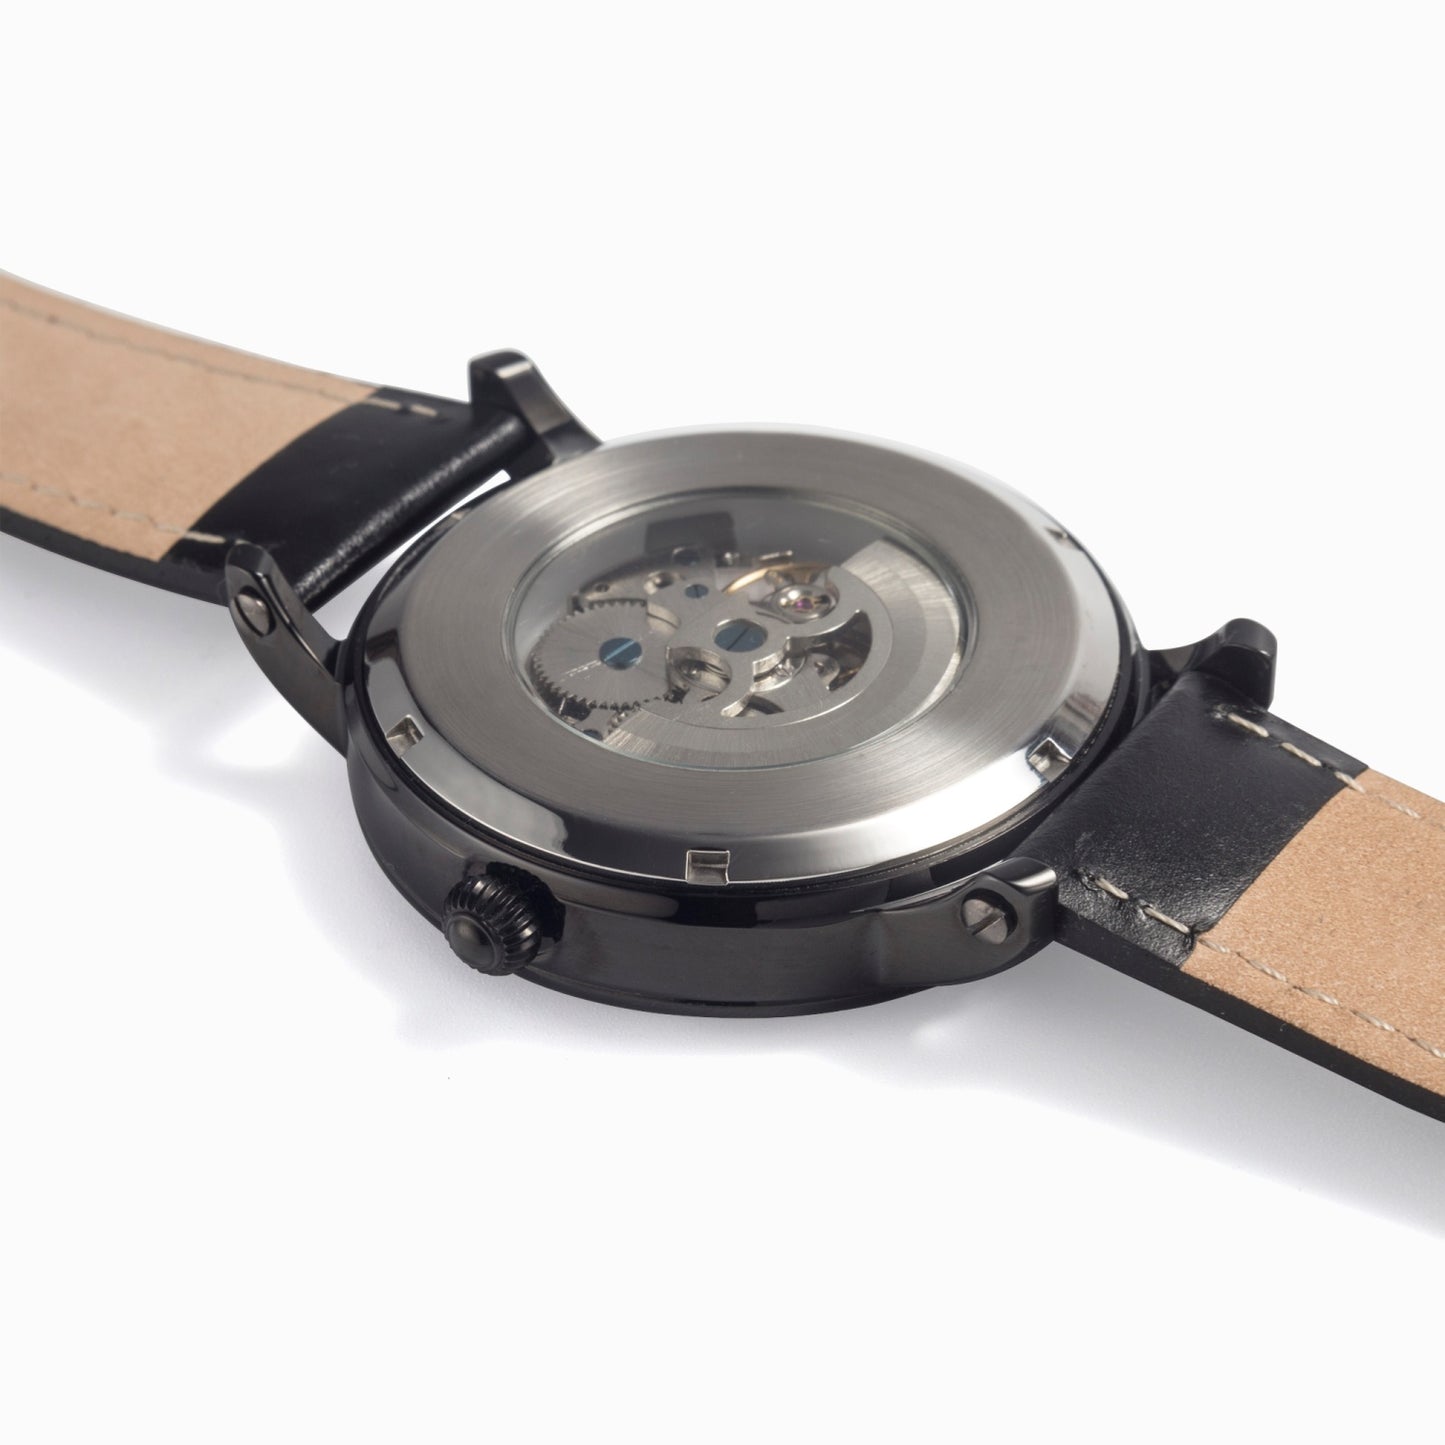 "Yellowstar" automatic leather watch (with indicators)